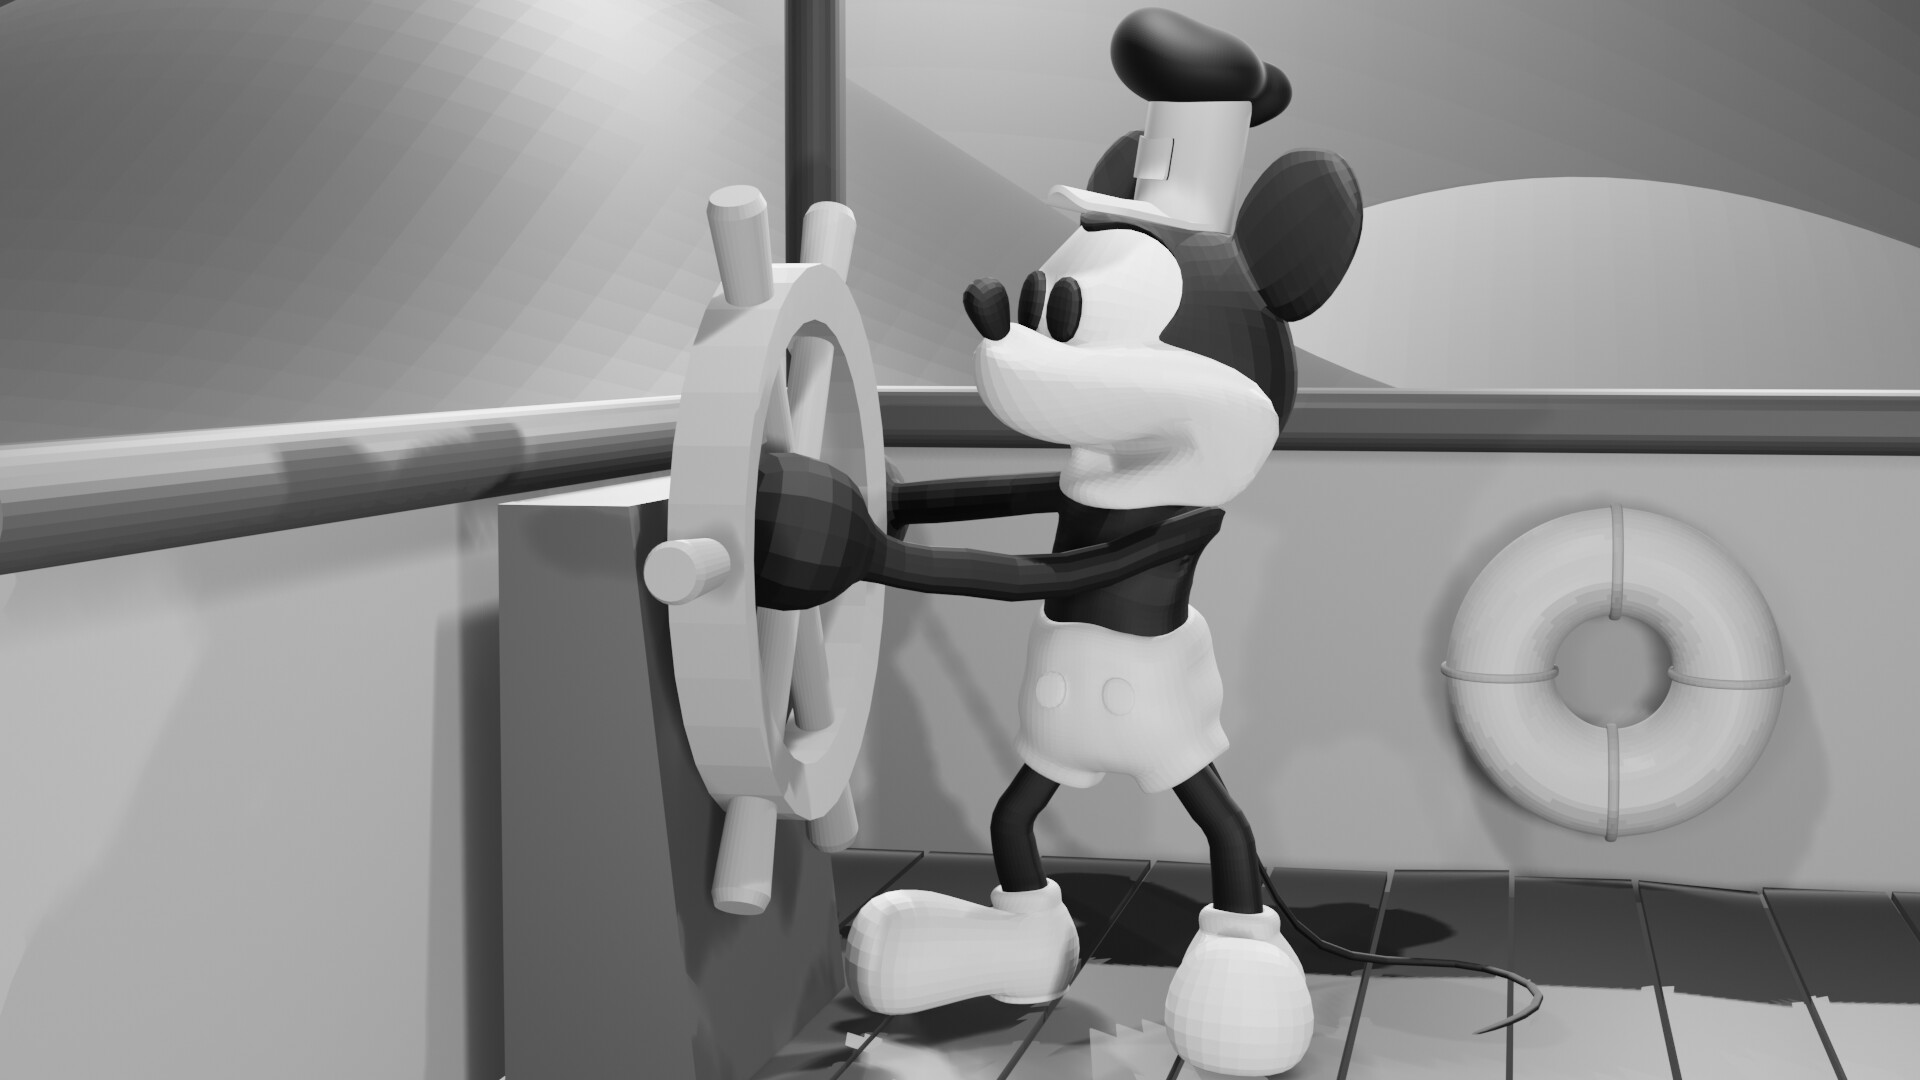 Steamboat Willie 3D, Dinh Trang Bui